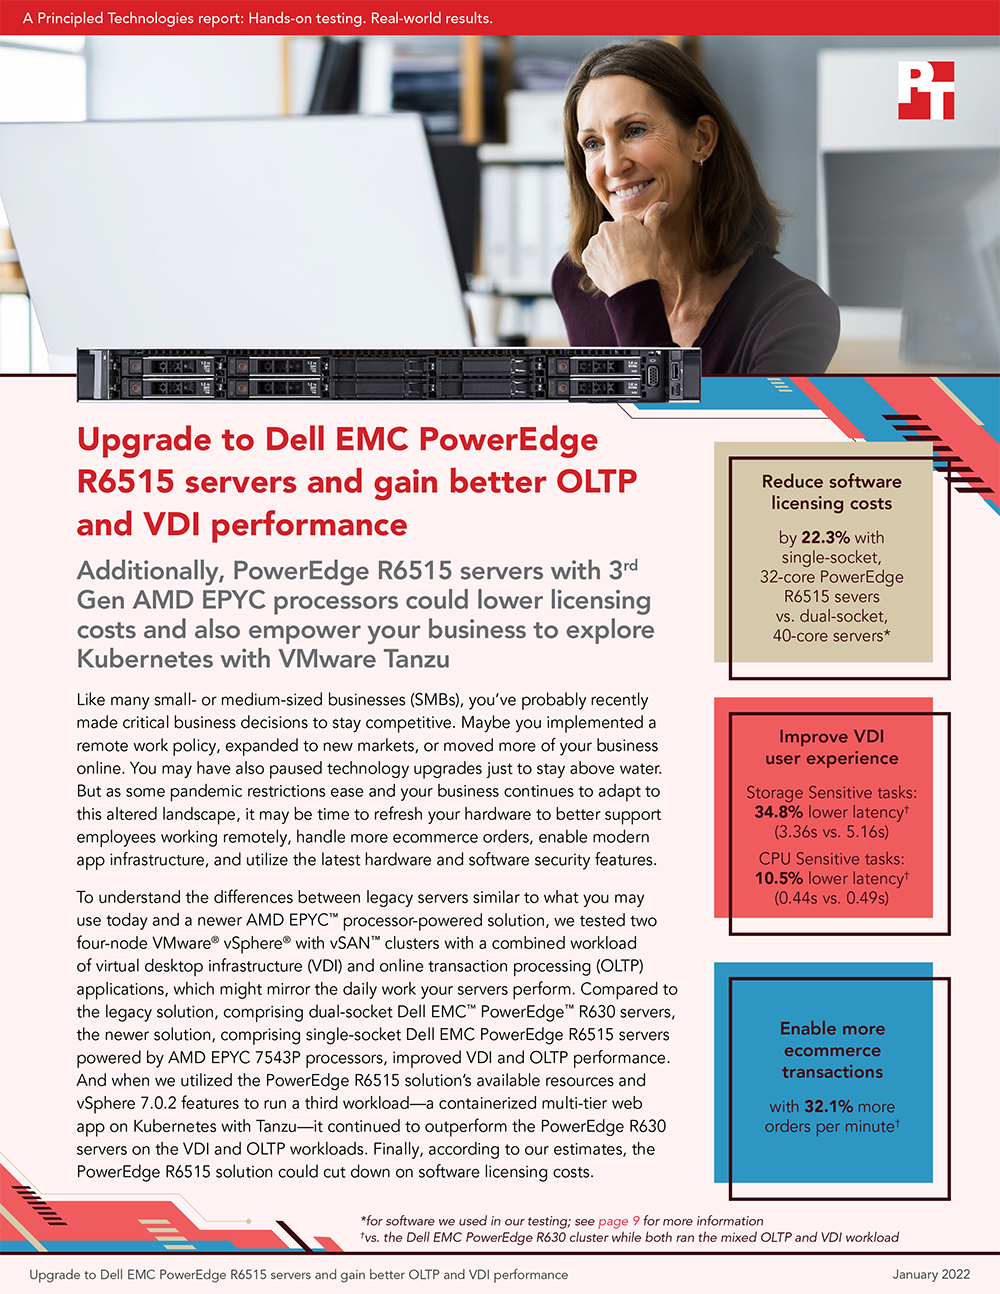 Principled Technologies Releases Study on Dell EMC PowerEdge R6515 Servers’ OLTP and VDI Performance